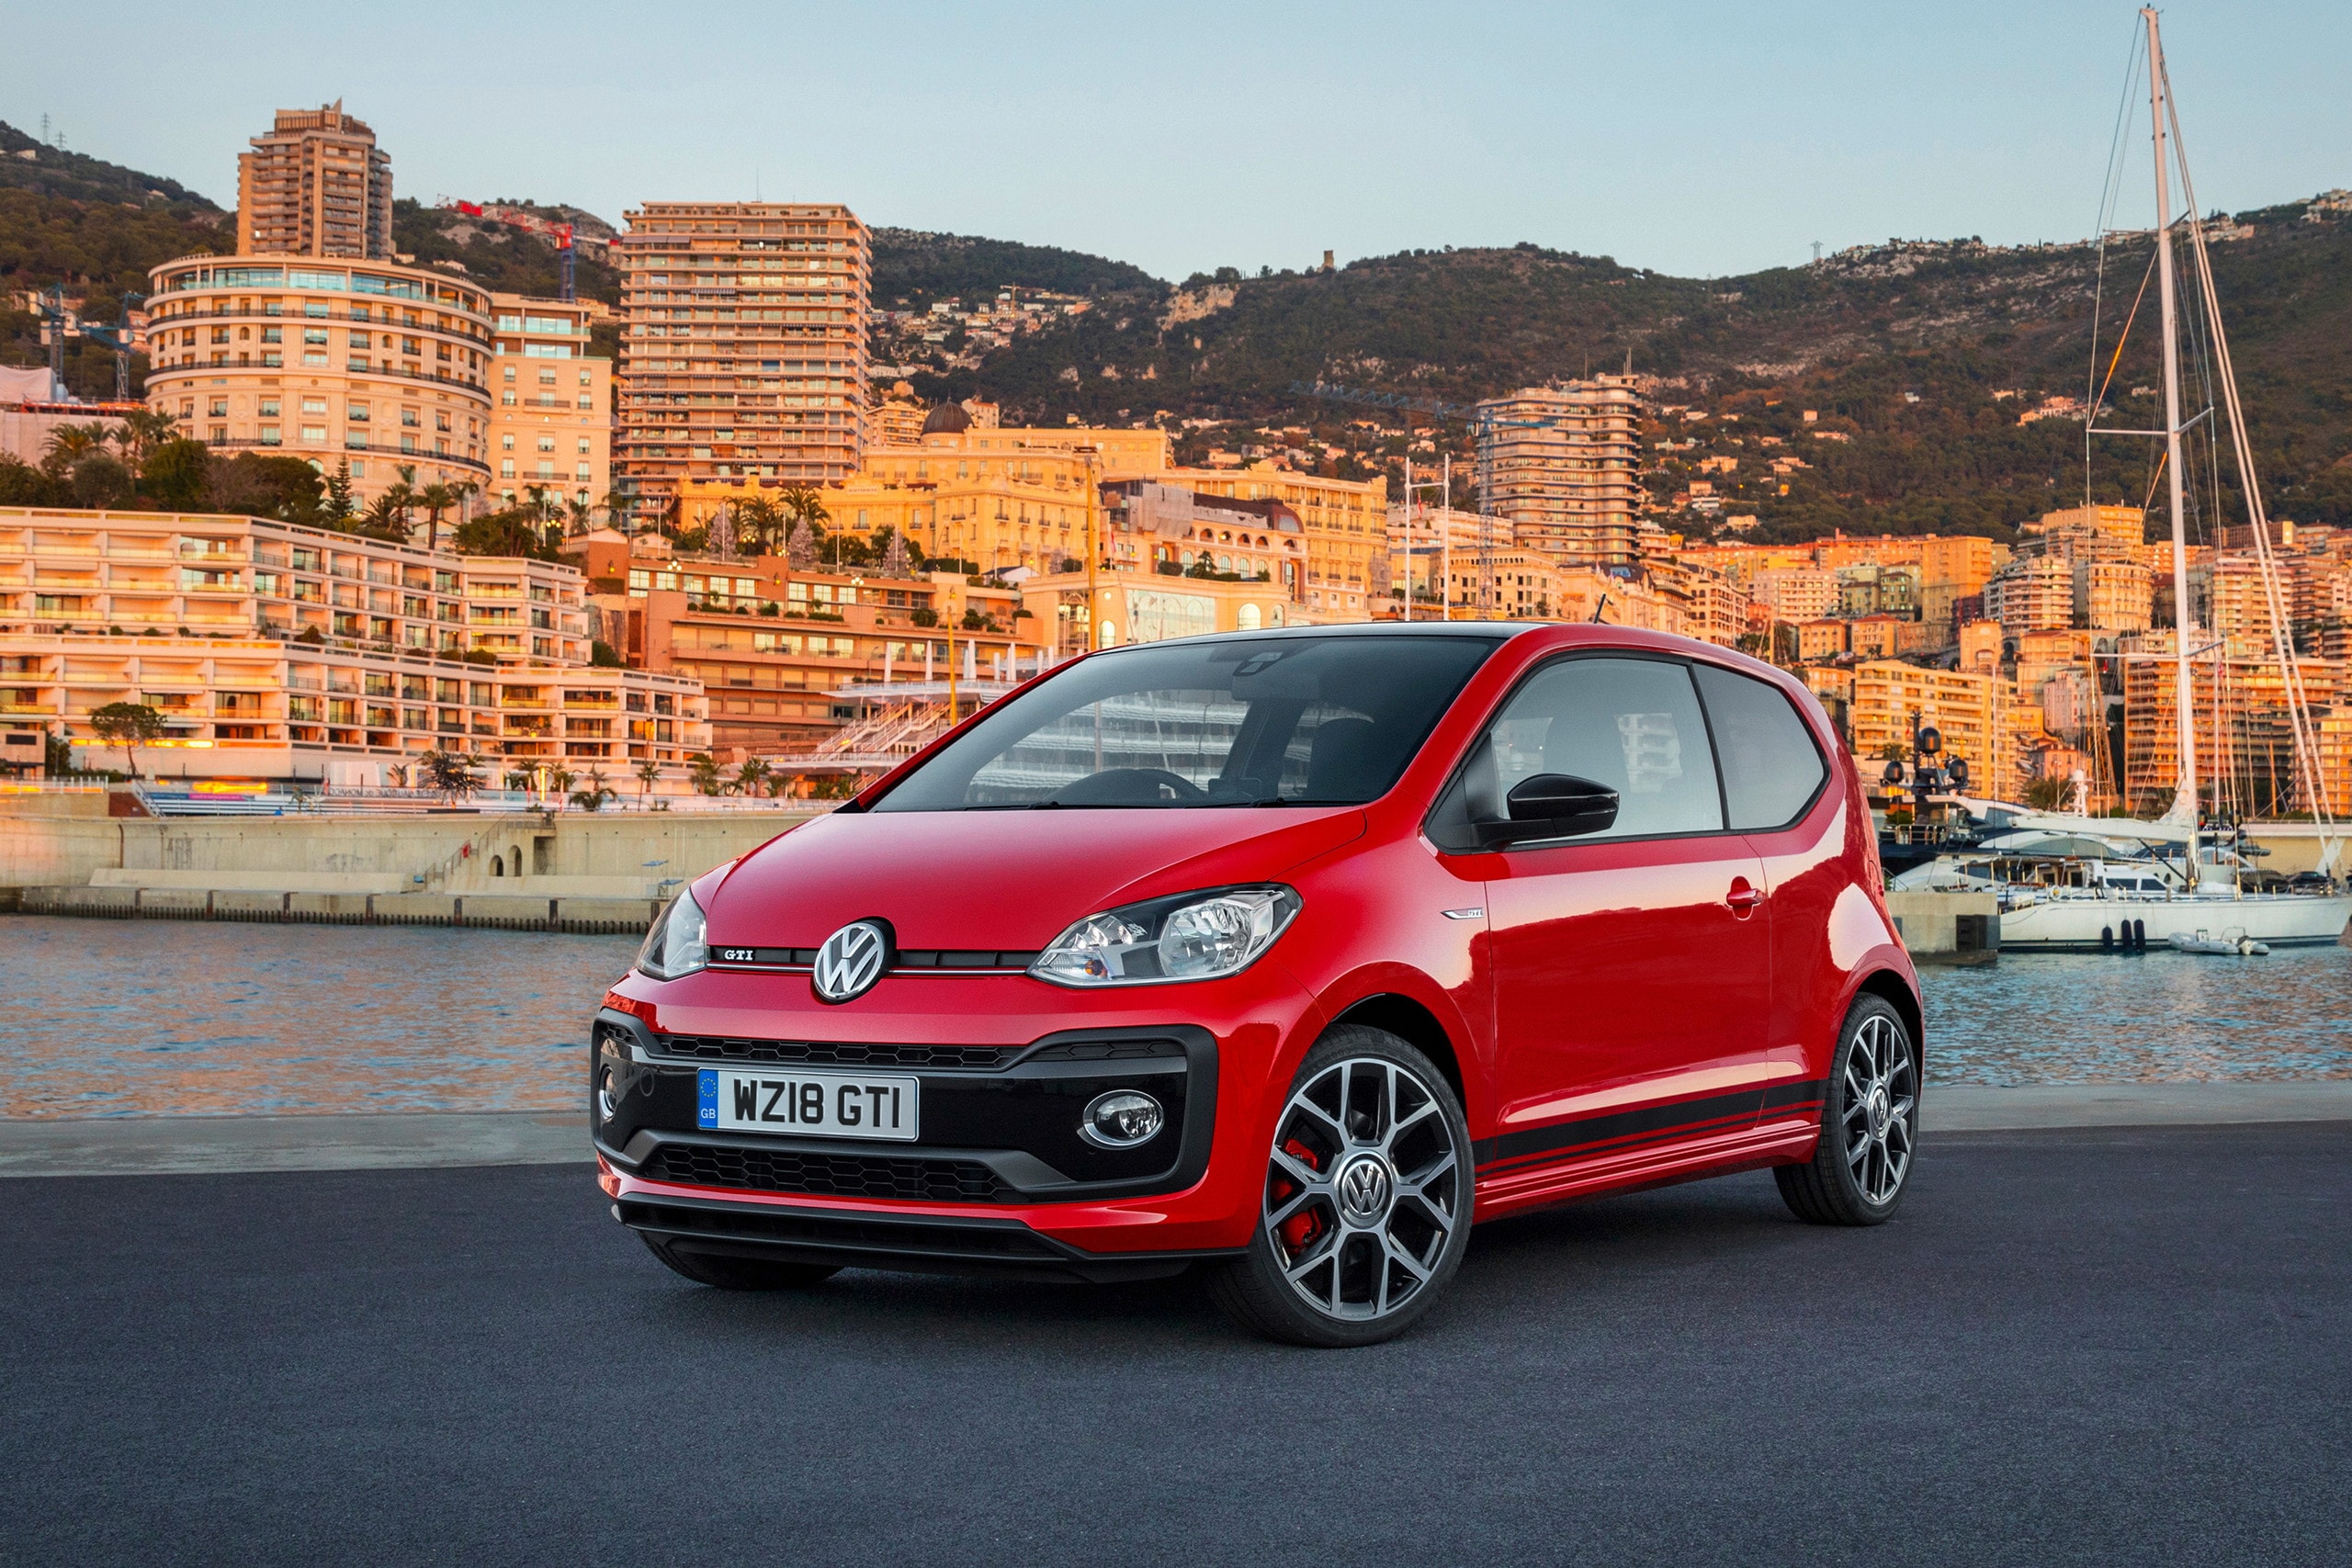 168-HP 1.0-Liter VW Up GTI Debunks No Replacement for